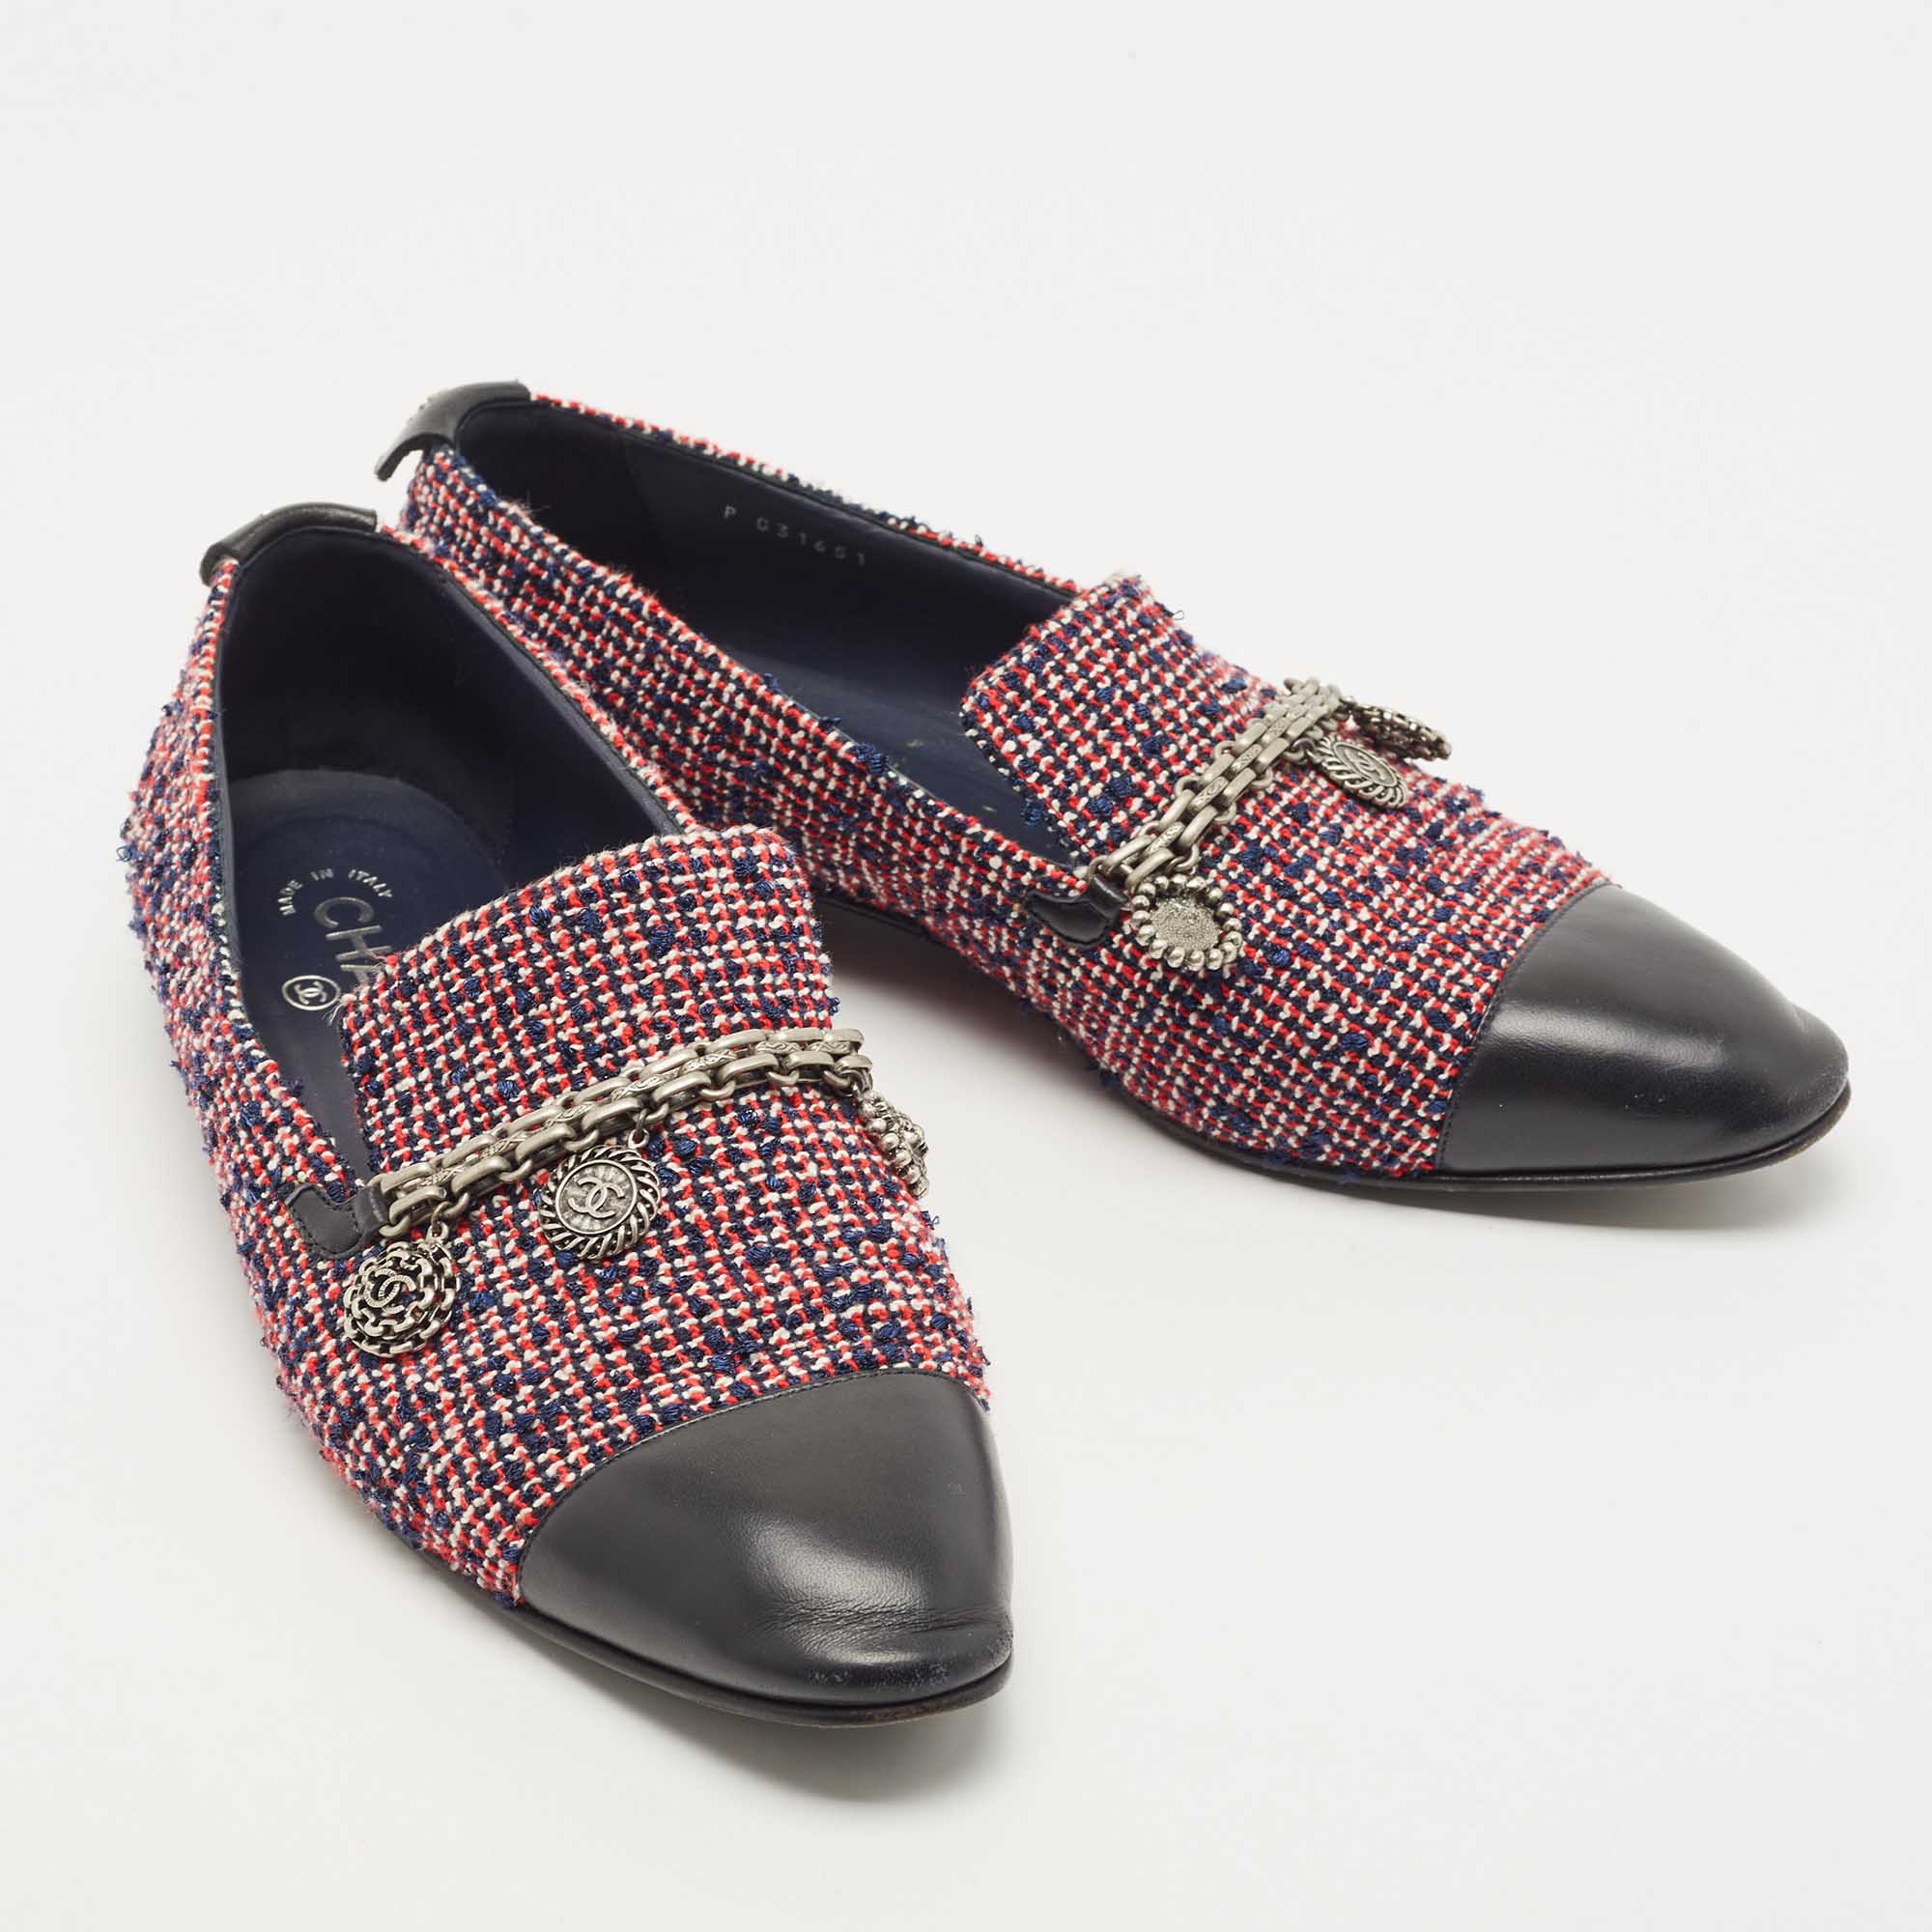 Chanel Tricolor Tweed And Leather Embellished CC Cap-Toe Smoking Slipper Size 40